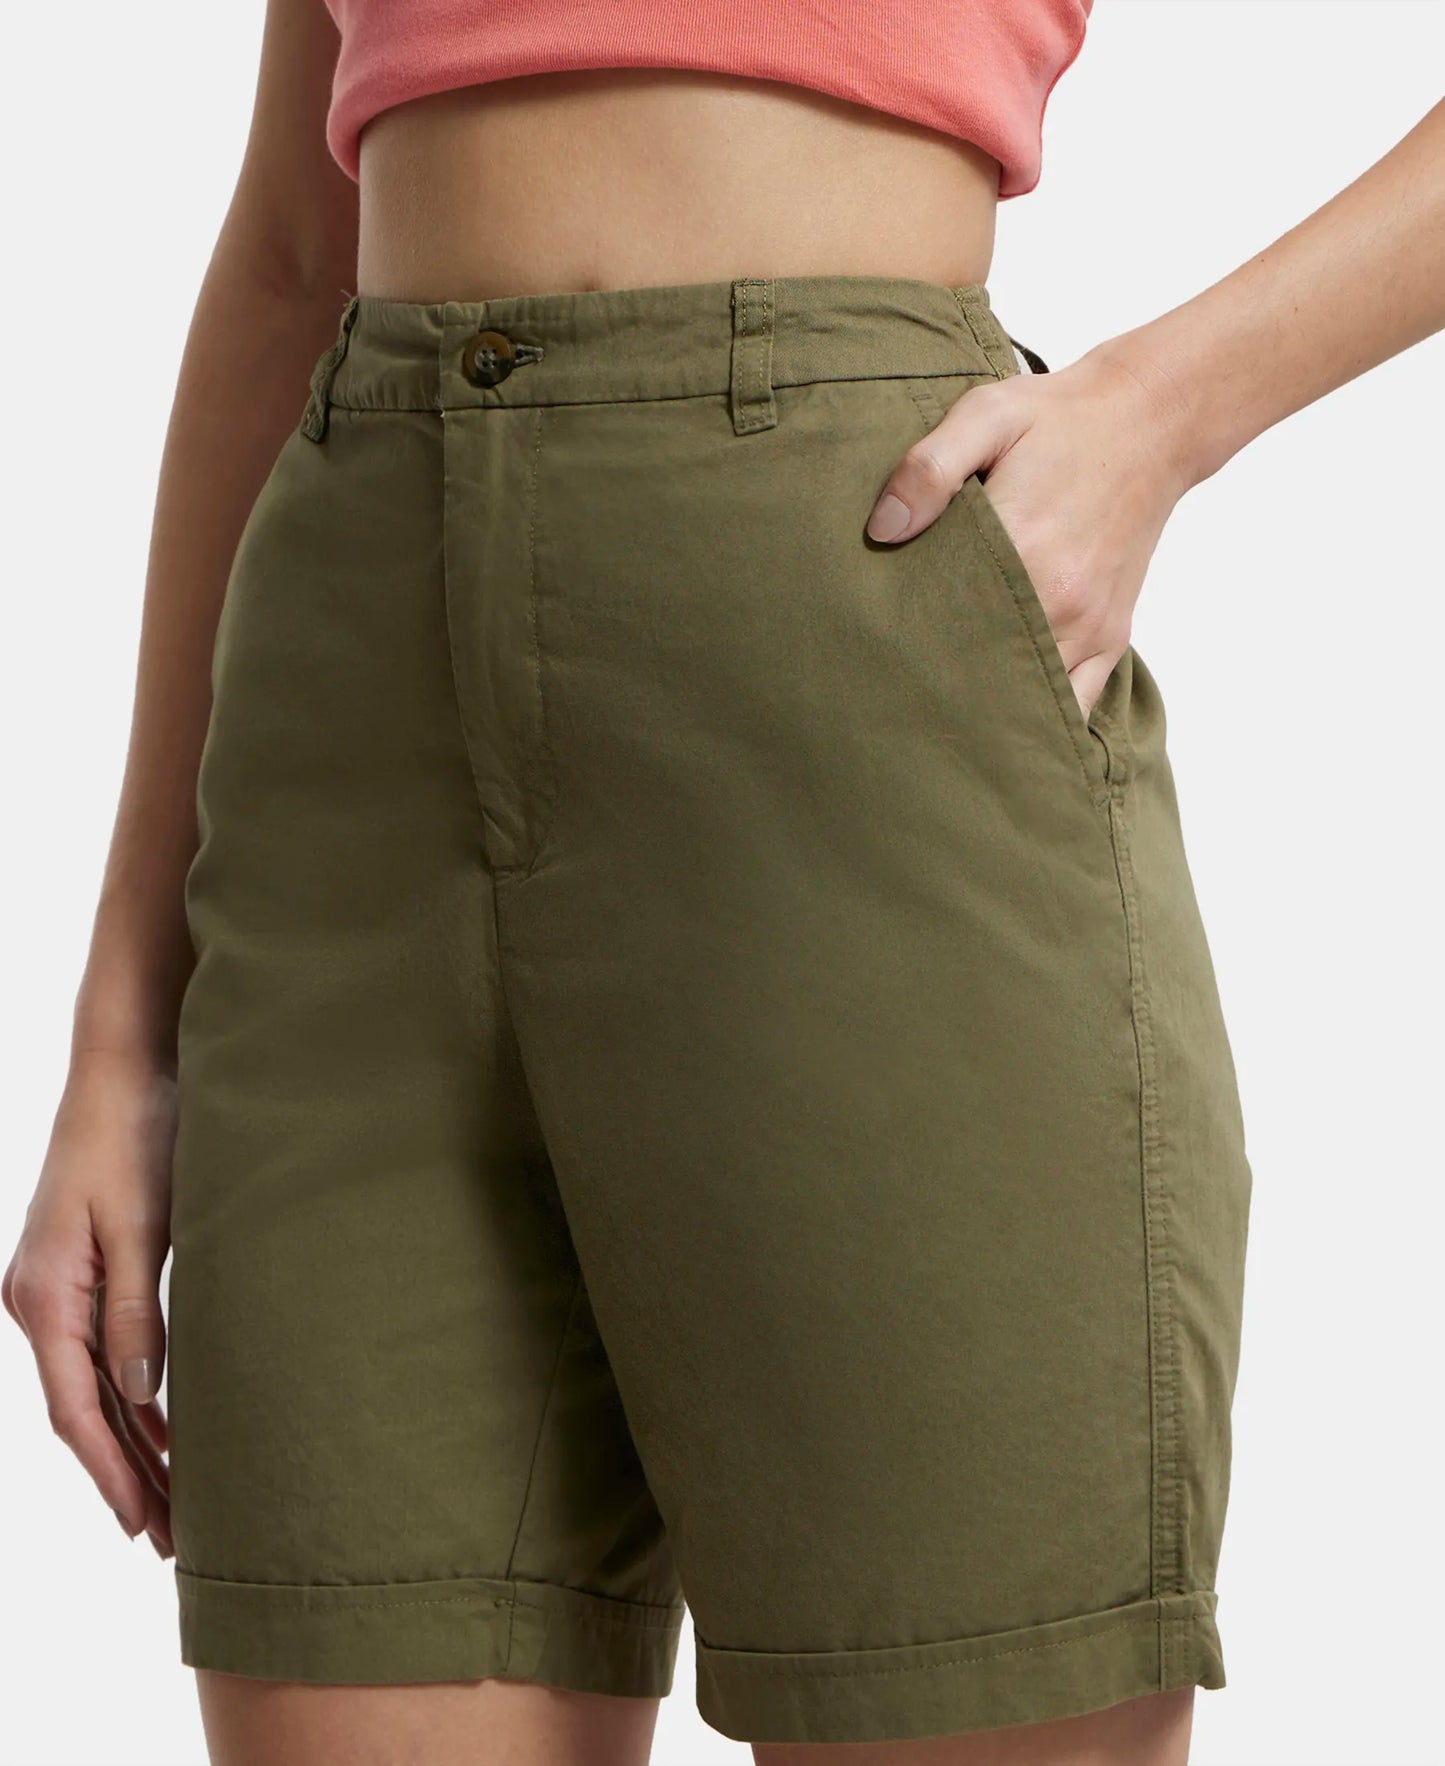 Super Combed Cotton Woven Twill Fabric Relaxed Fit Shorts with Convenient Side Pockets - Burnt Olive-7